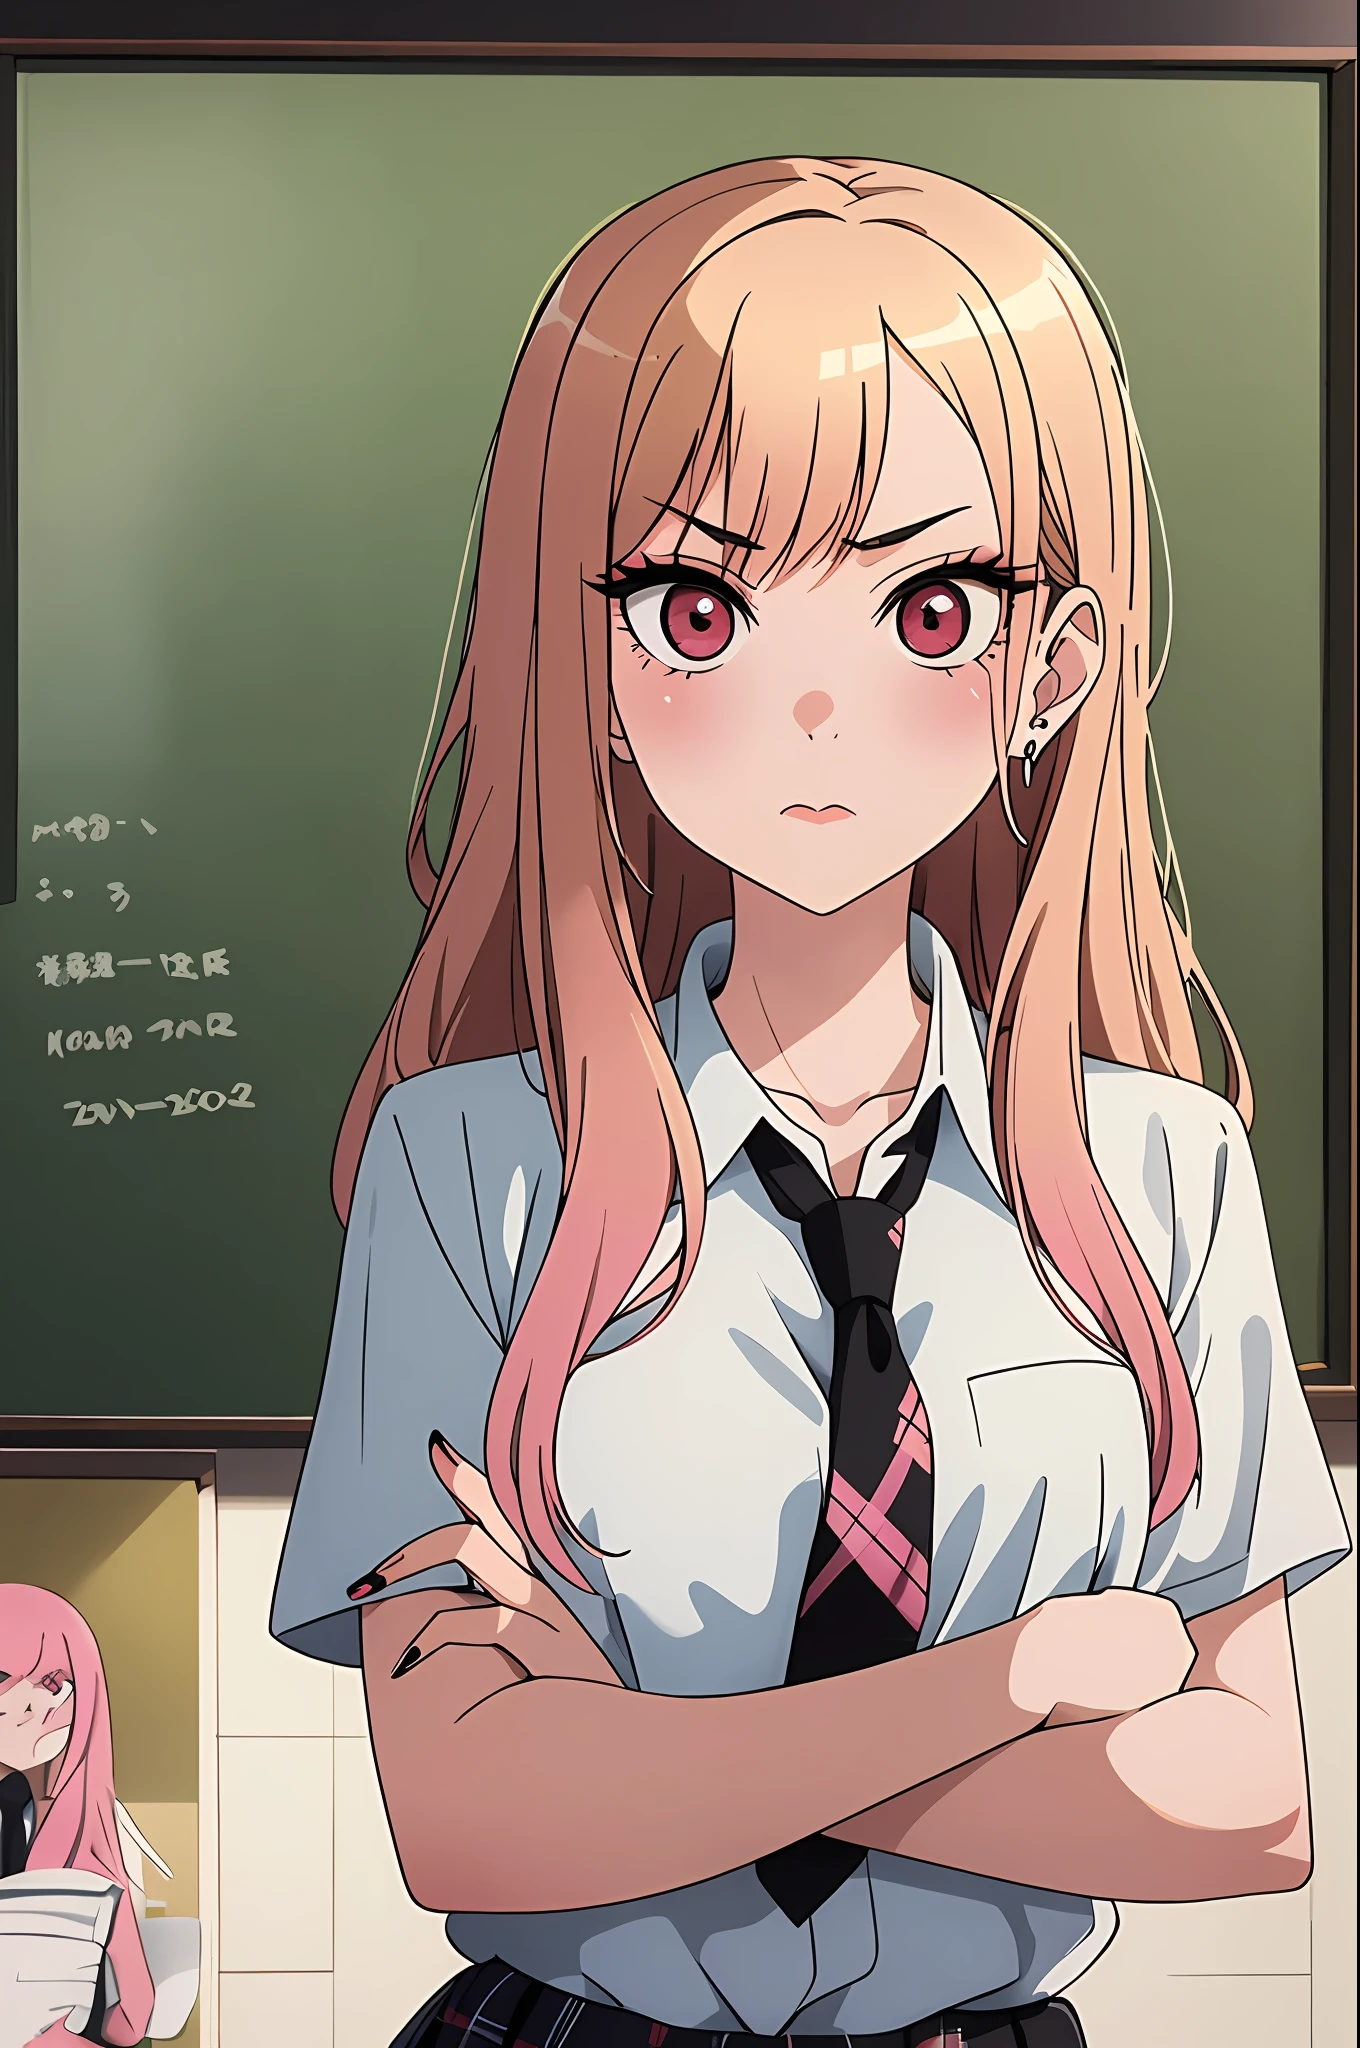 1girl, Kitagawa, portrait, blonde, masterpiece, best quality, highres, upper blodie, (from front), 1 girl, blonde hair, long hair, hq, straight hair, pink hair tips, red eyes, piercing in ear, , white shirt, tied shirt, black chocker, gray necktie, skirt plaid, (serious), look serious, flushy, pink lips, medium bust, (stand), (school class), soft skin, (high quality cloting), shiny eyes, pink eyelid, black eyeliner, nails pink, (crossed arms), beautiful face, 4k, chalkboard in the background, best quality, raw camera, chairs tables,